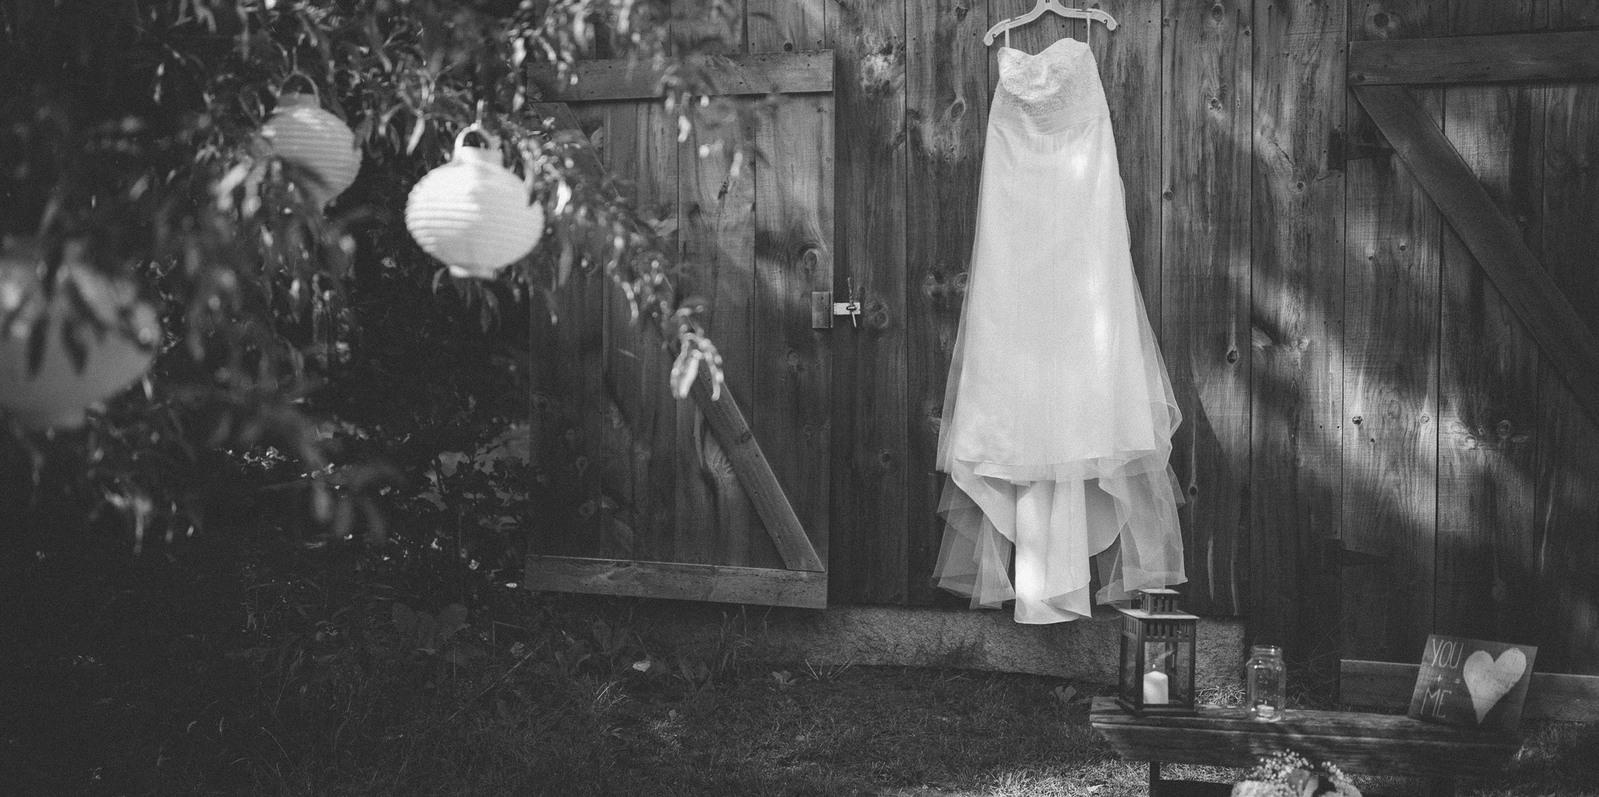 Boho wedding dress and other wedding decorations hanging on a barn